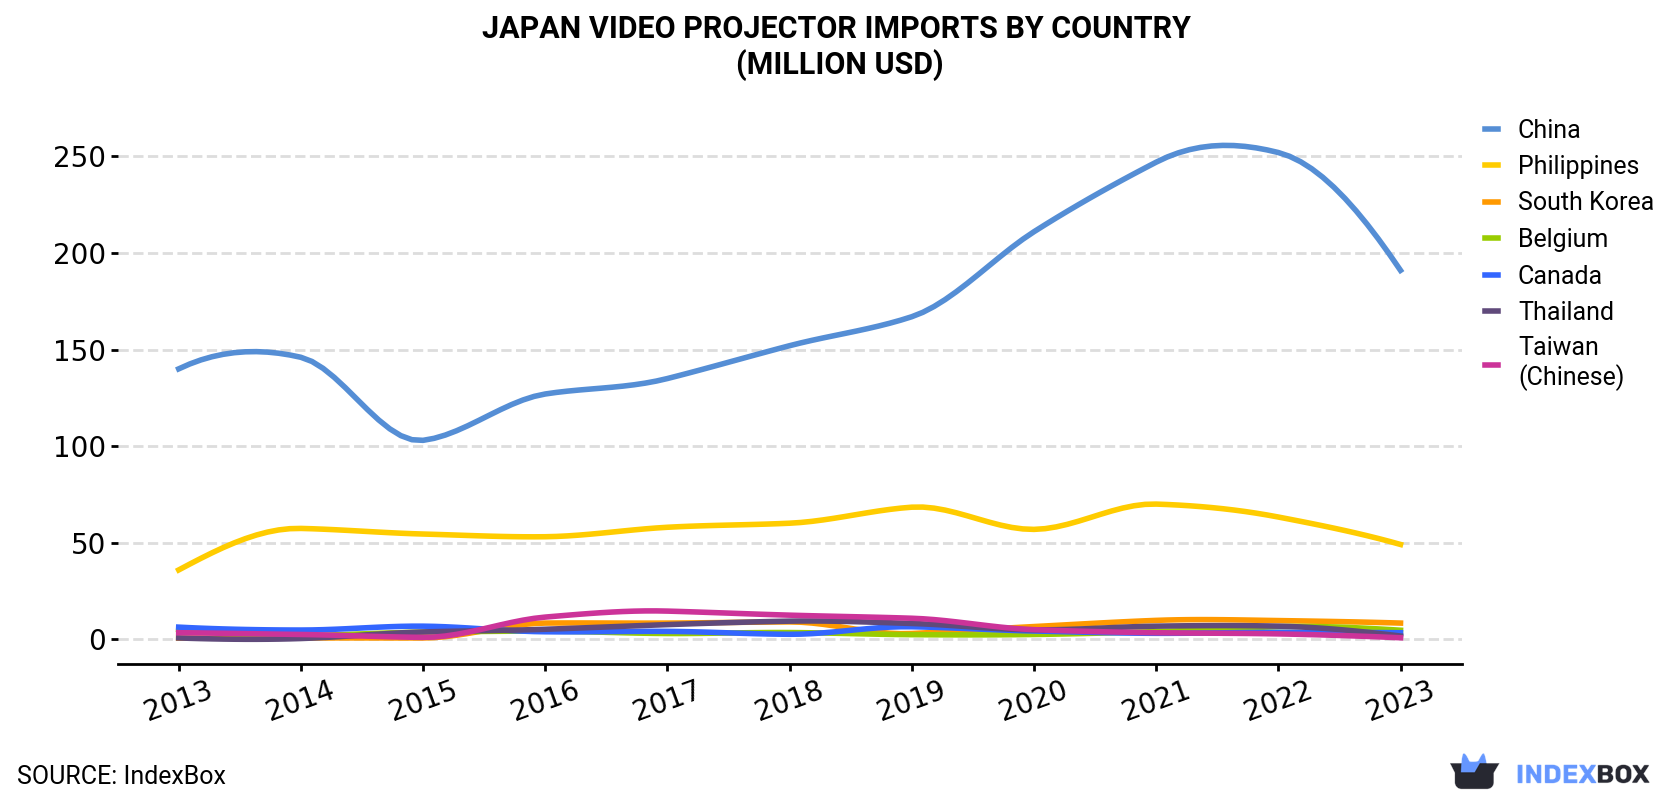 Japan Video Projector Imports By Country (Million USD)